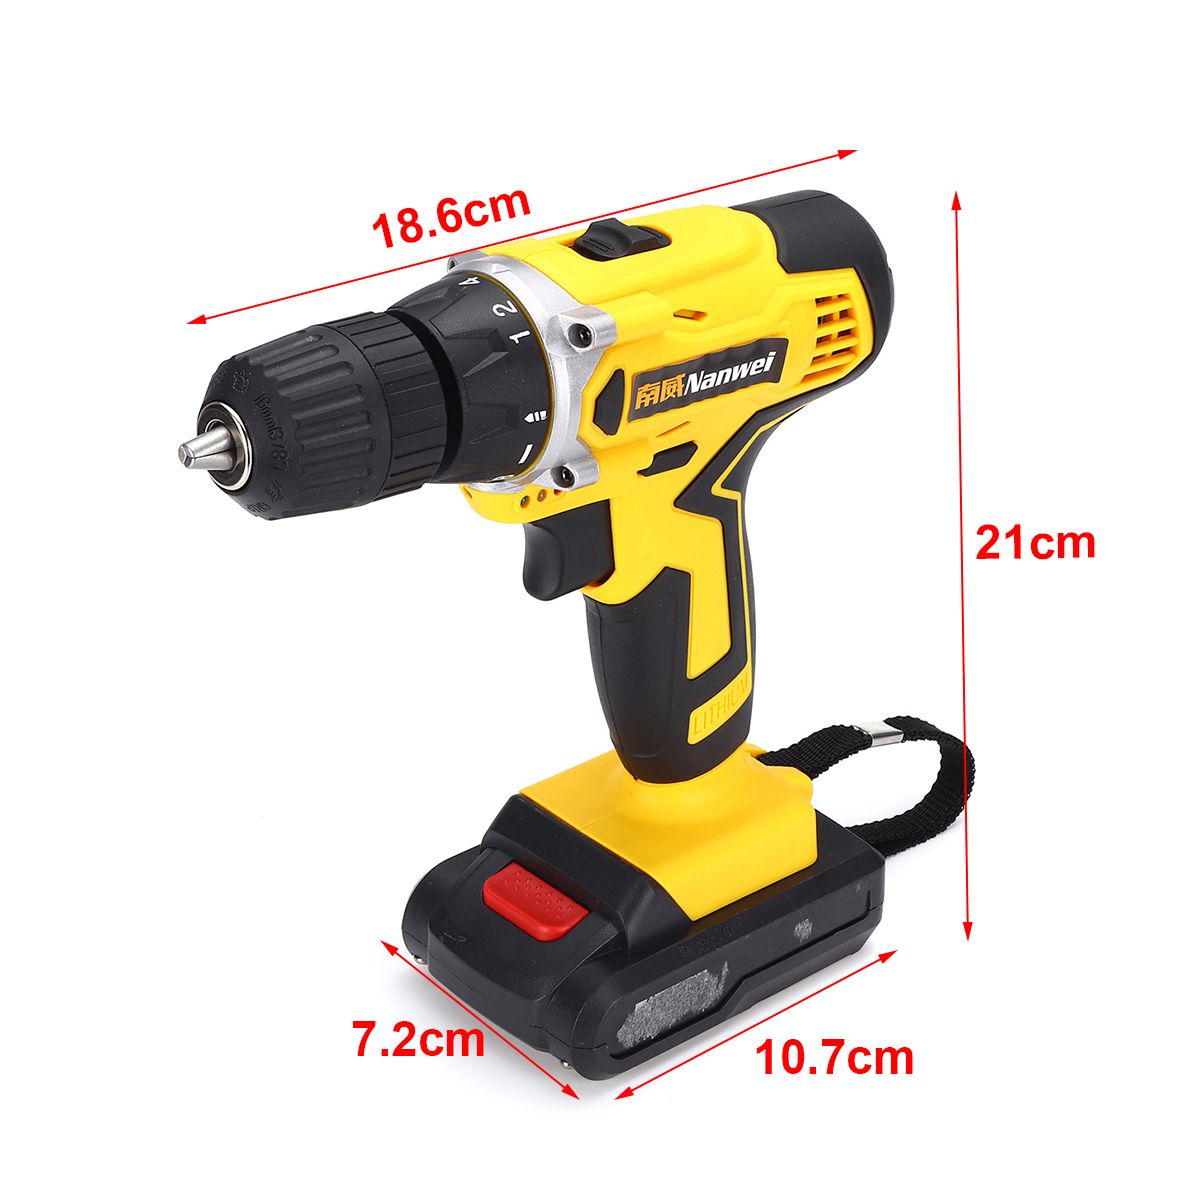 48VF-Electric-Cordless-Drill-Driver-Screwdriver-LED-Light-2-speed-Power-Drill-w-1-or-2-Battery-1471954